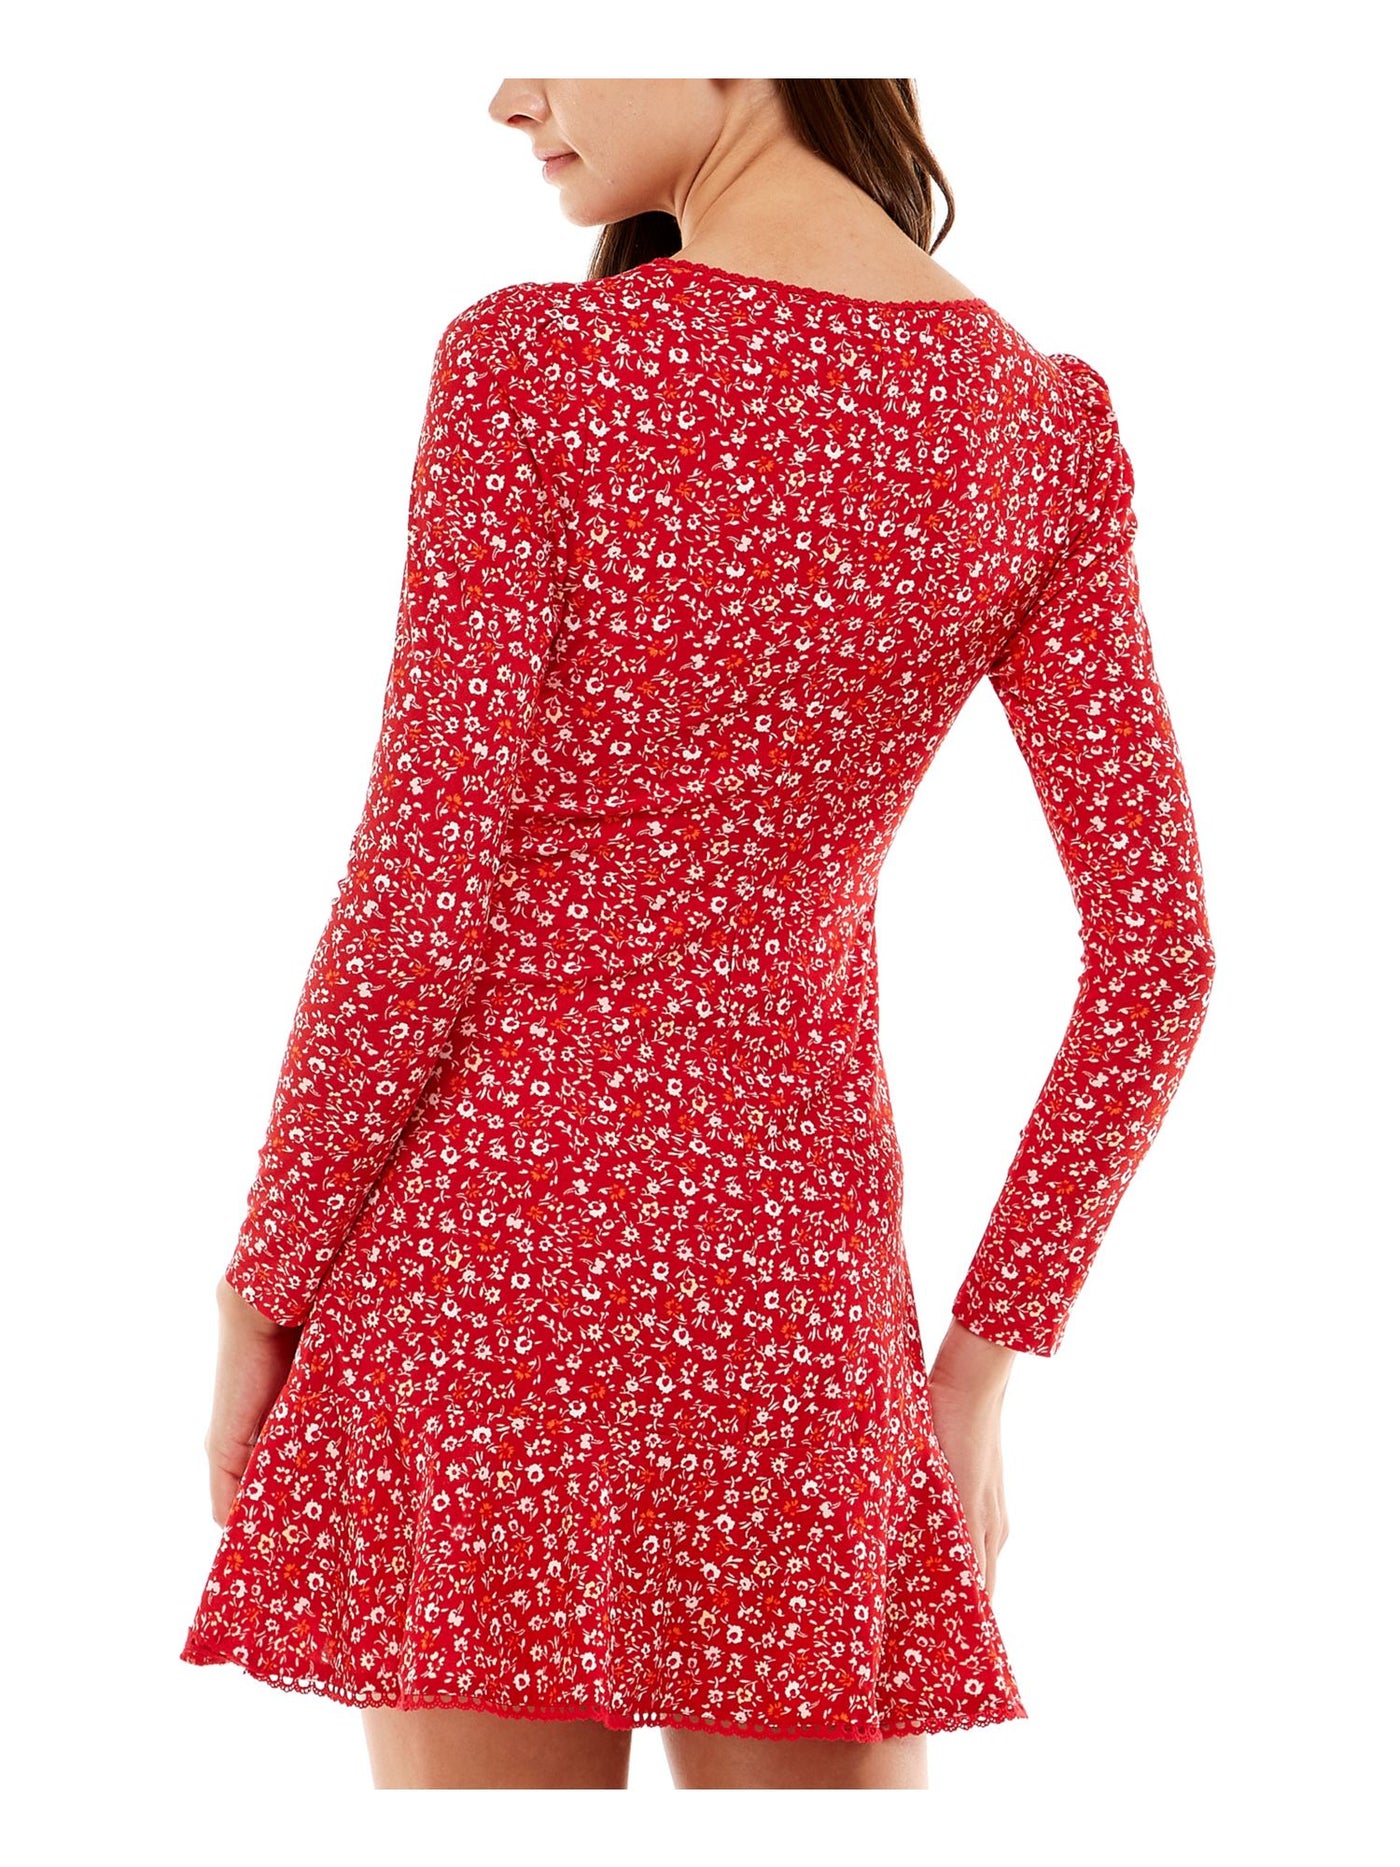 CITY STUDIO Womens Red Fitted Lined Lace Trim Floral Long Sleeve Surplice Neckline Mini Party Fit + Flare Dress Juniors XL